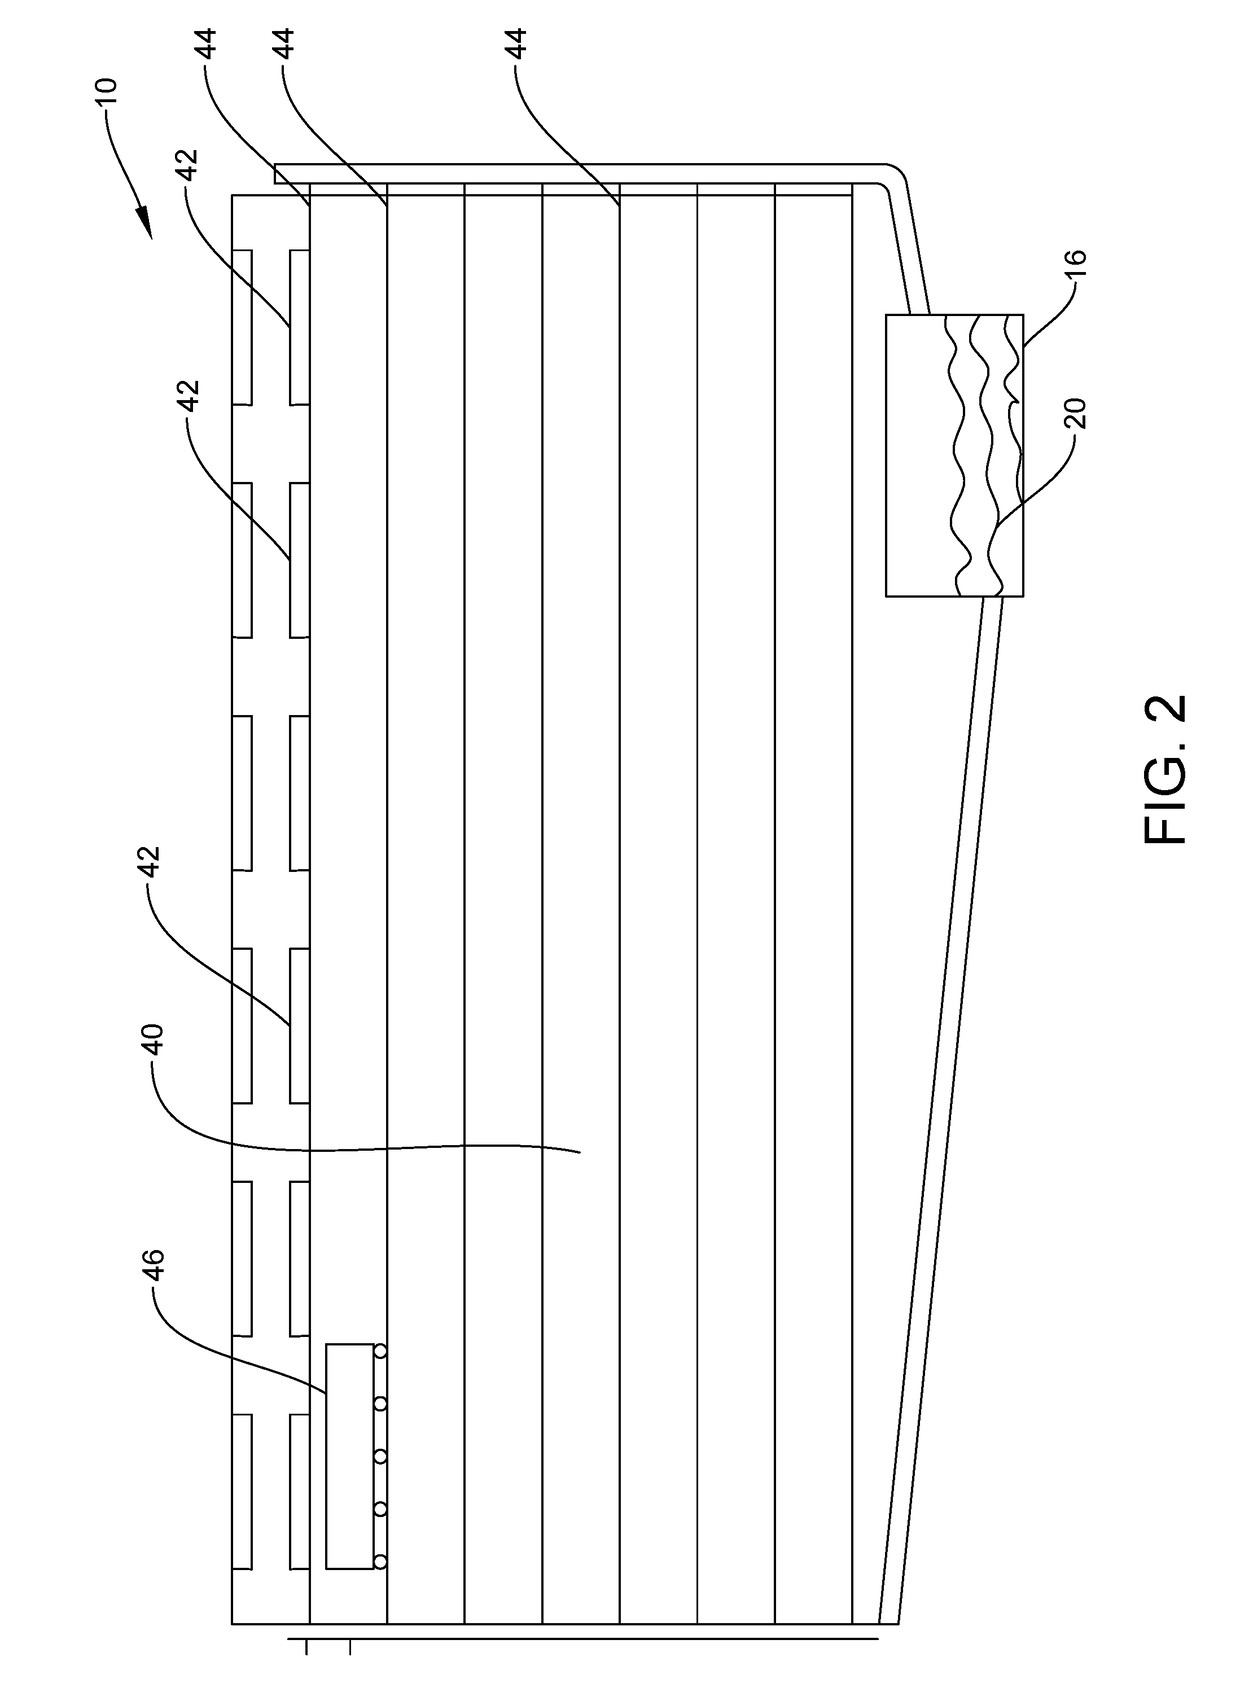 Apparatus, system and methods for improved vertical farming